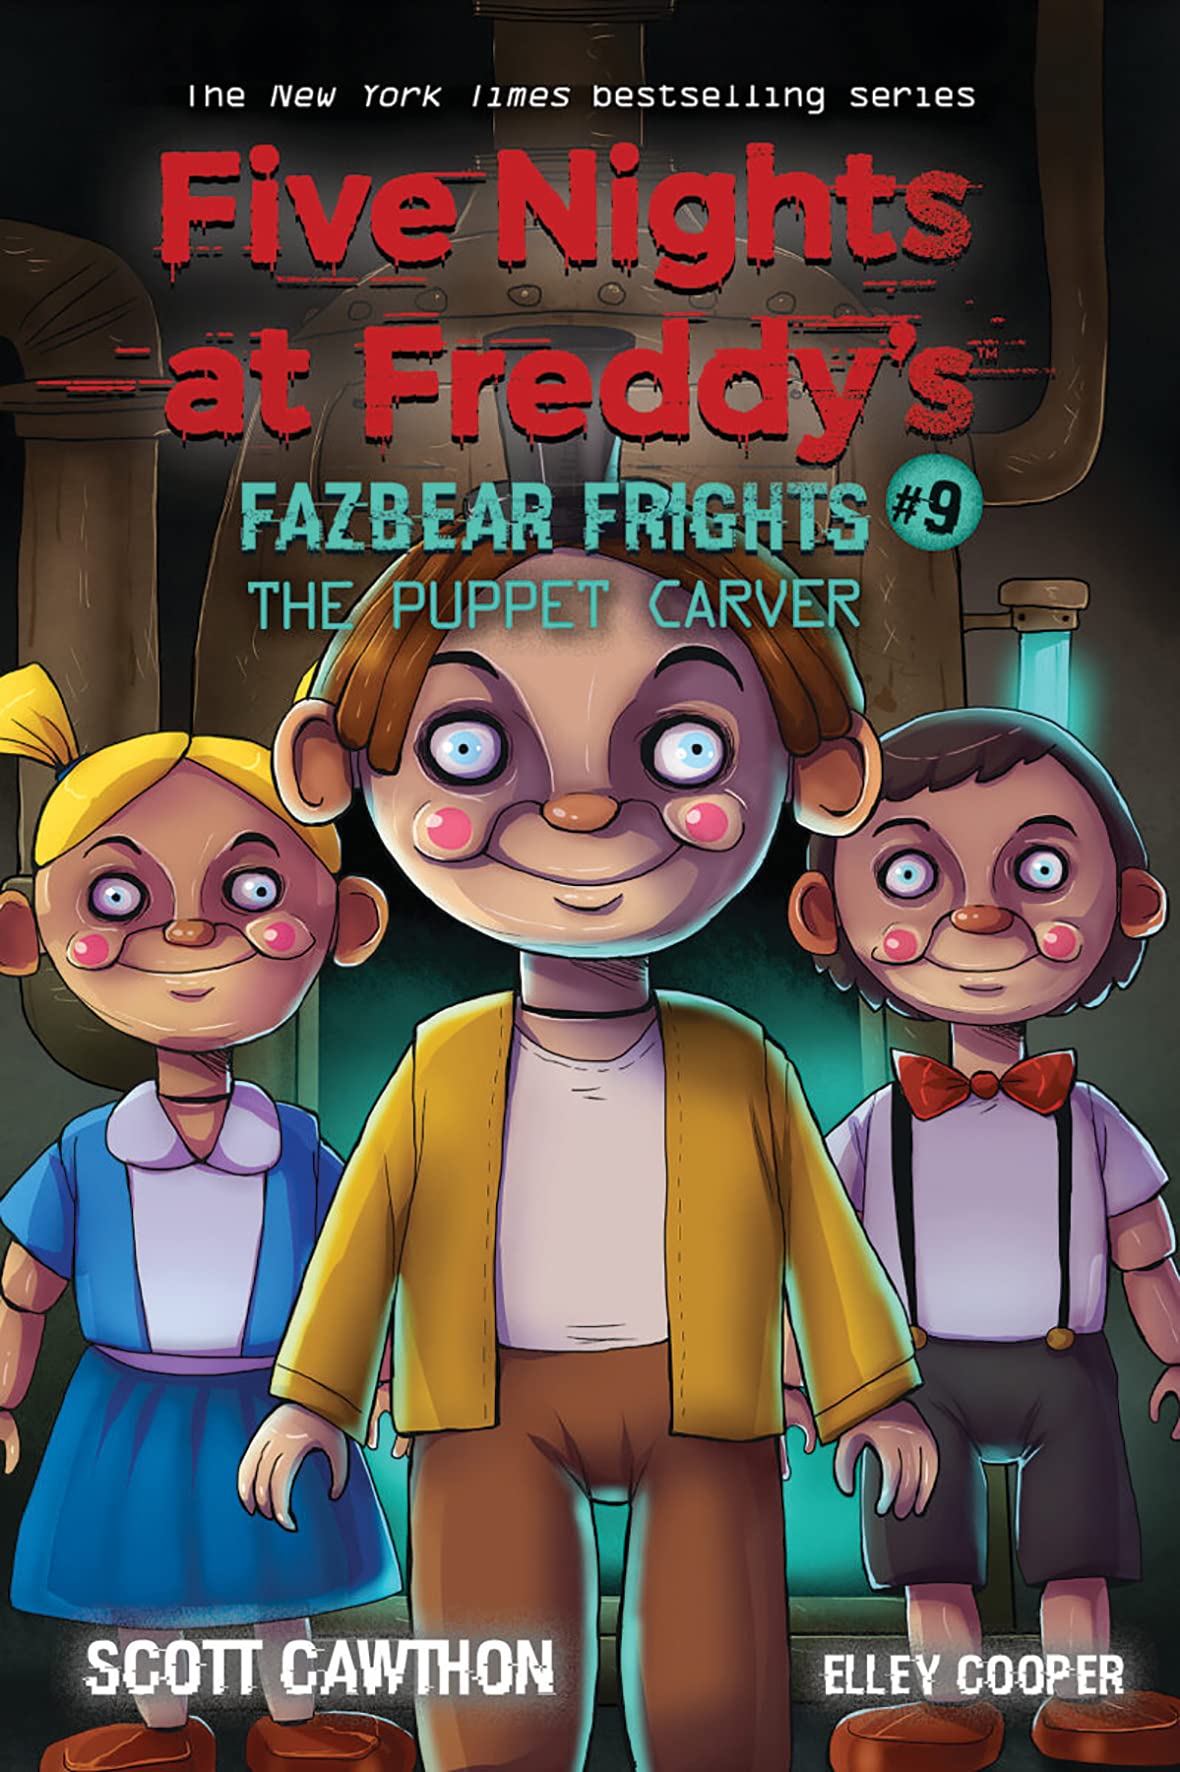 Five Nights at Freddy’s: Fazbear Frights #9 - The Puppet Carver